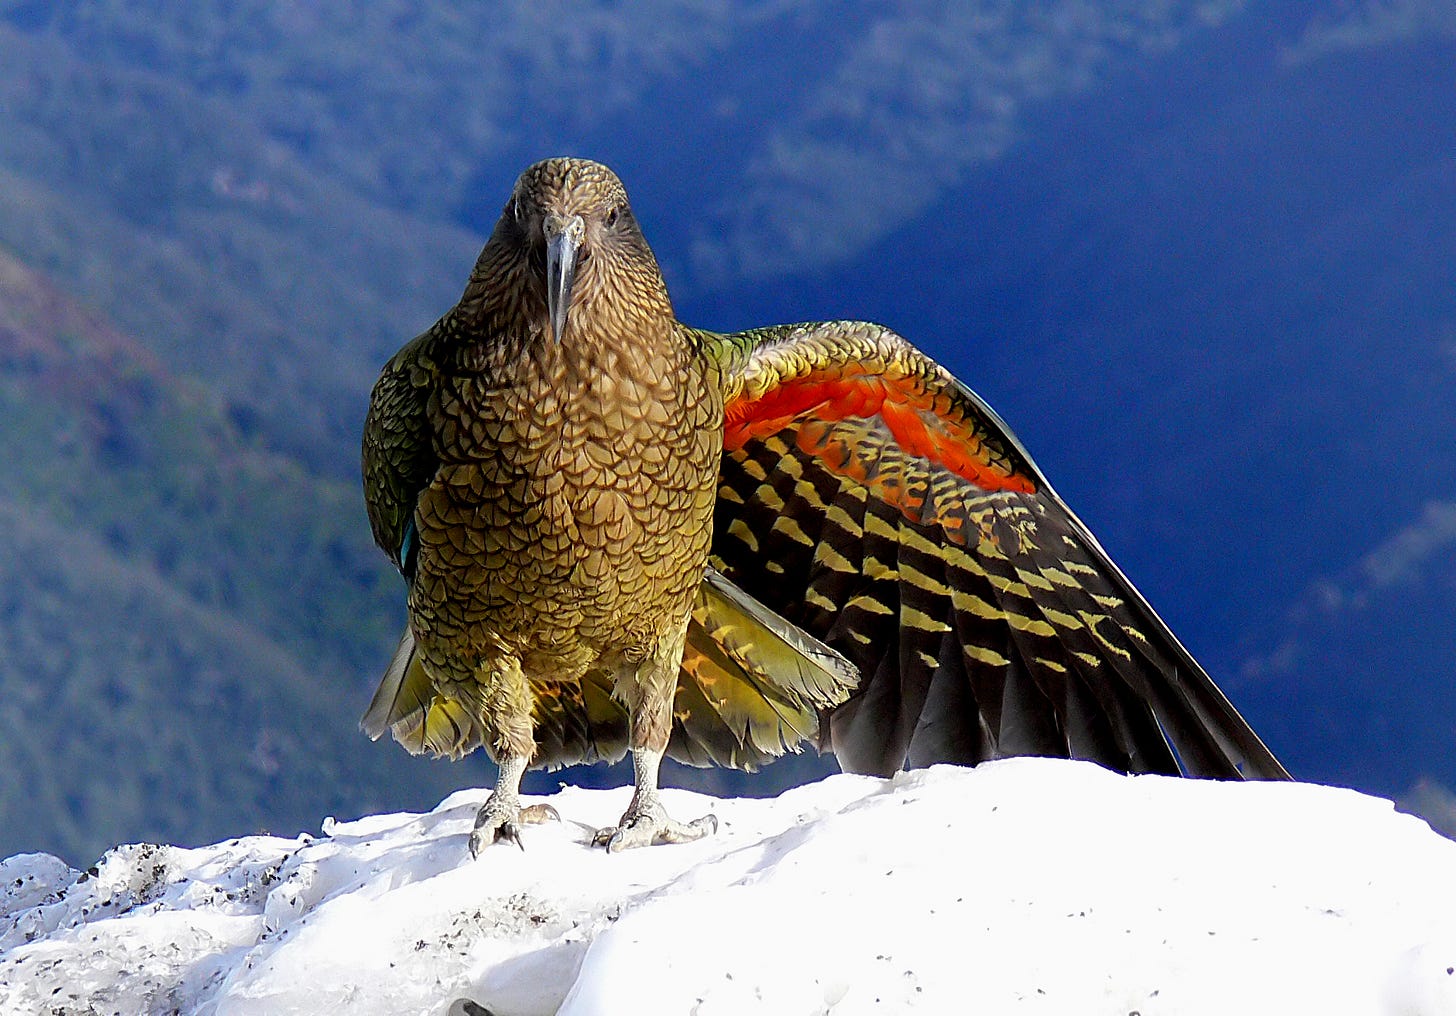 Kea with one wing open